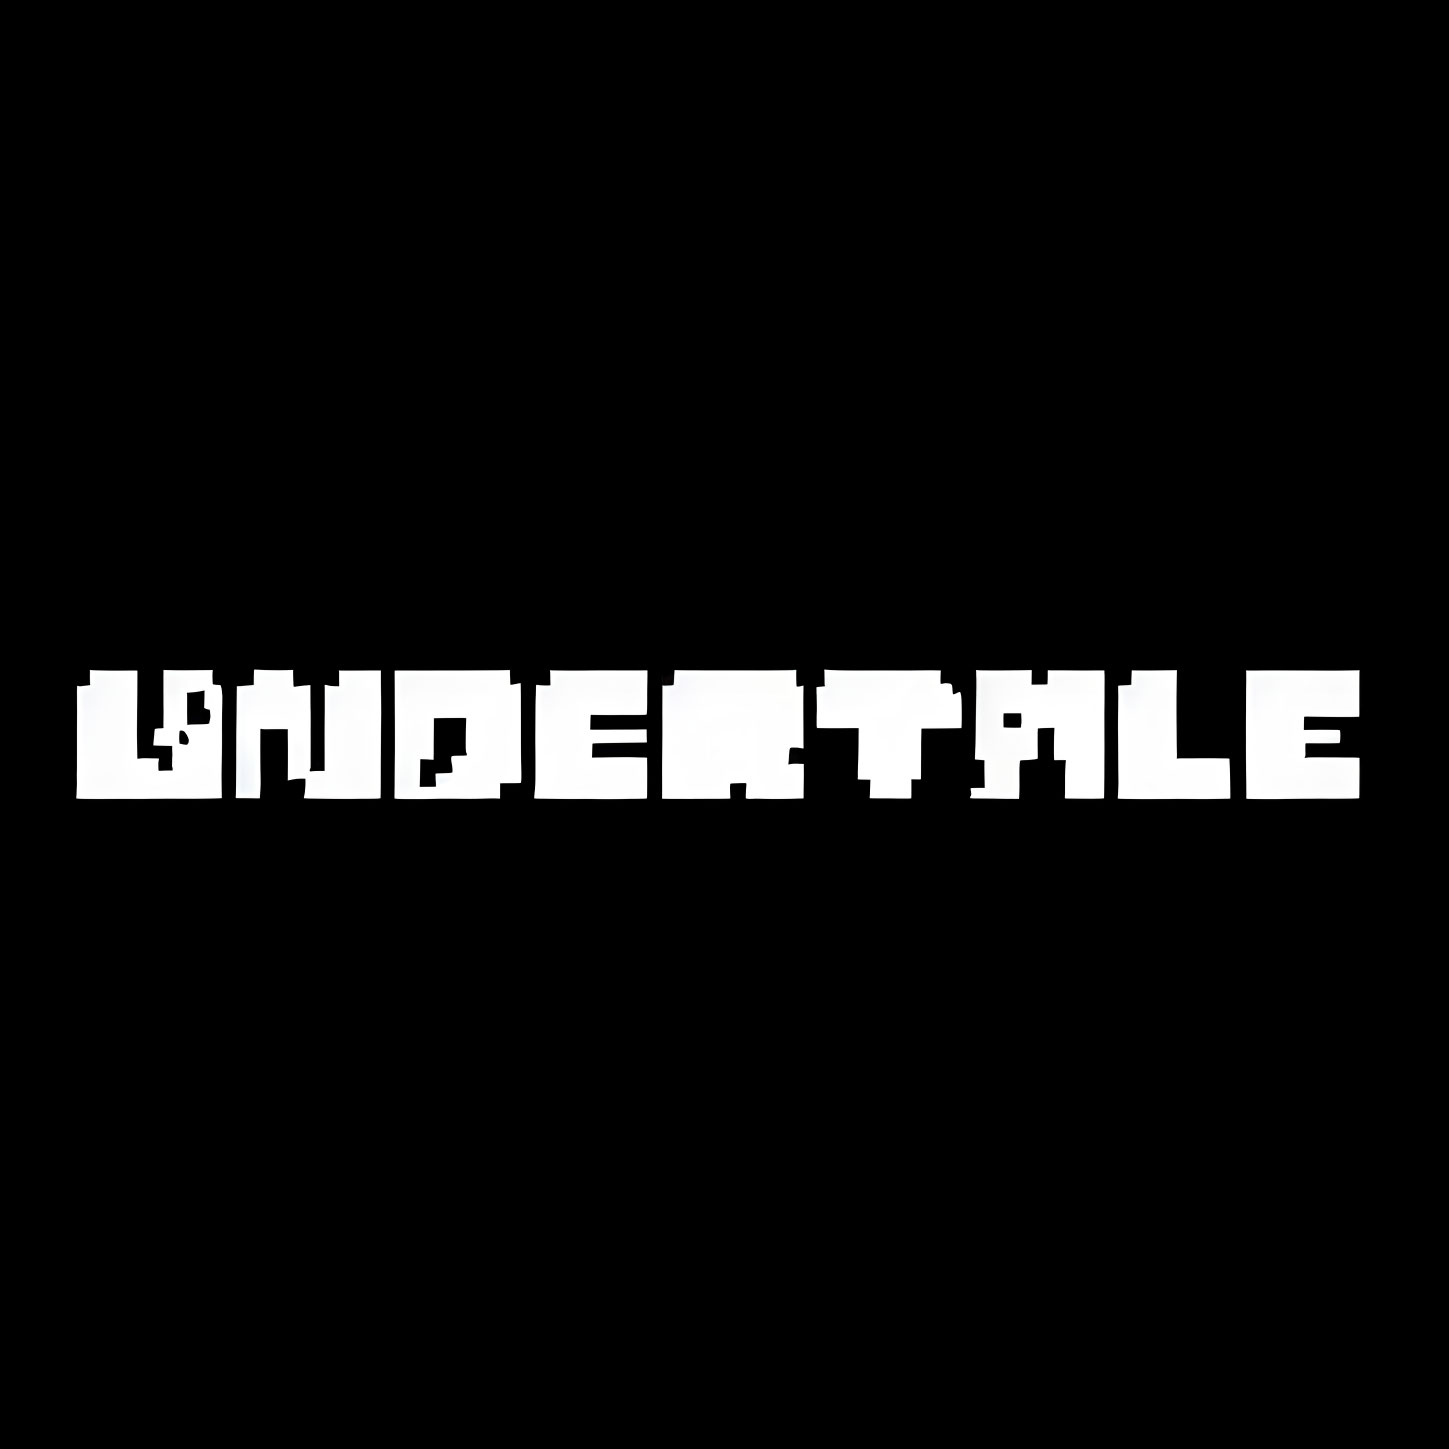 Pixelated white text on black background: Undertale video game logo.